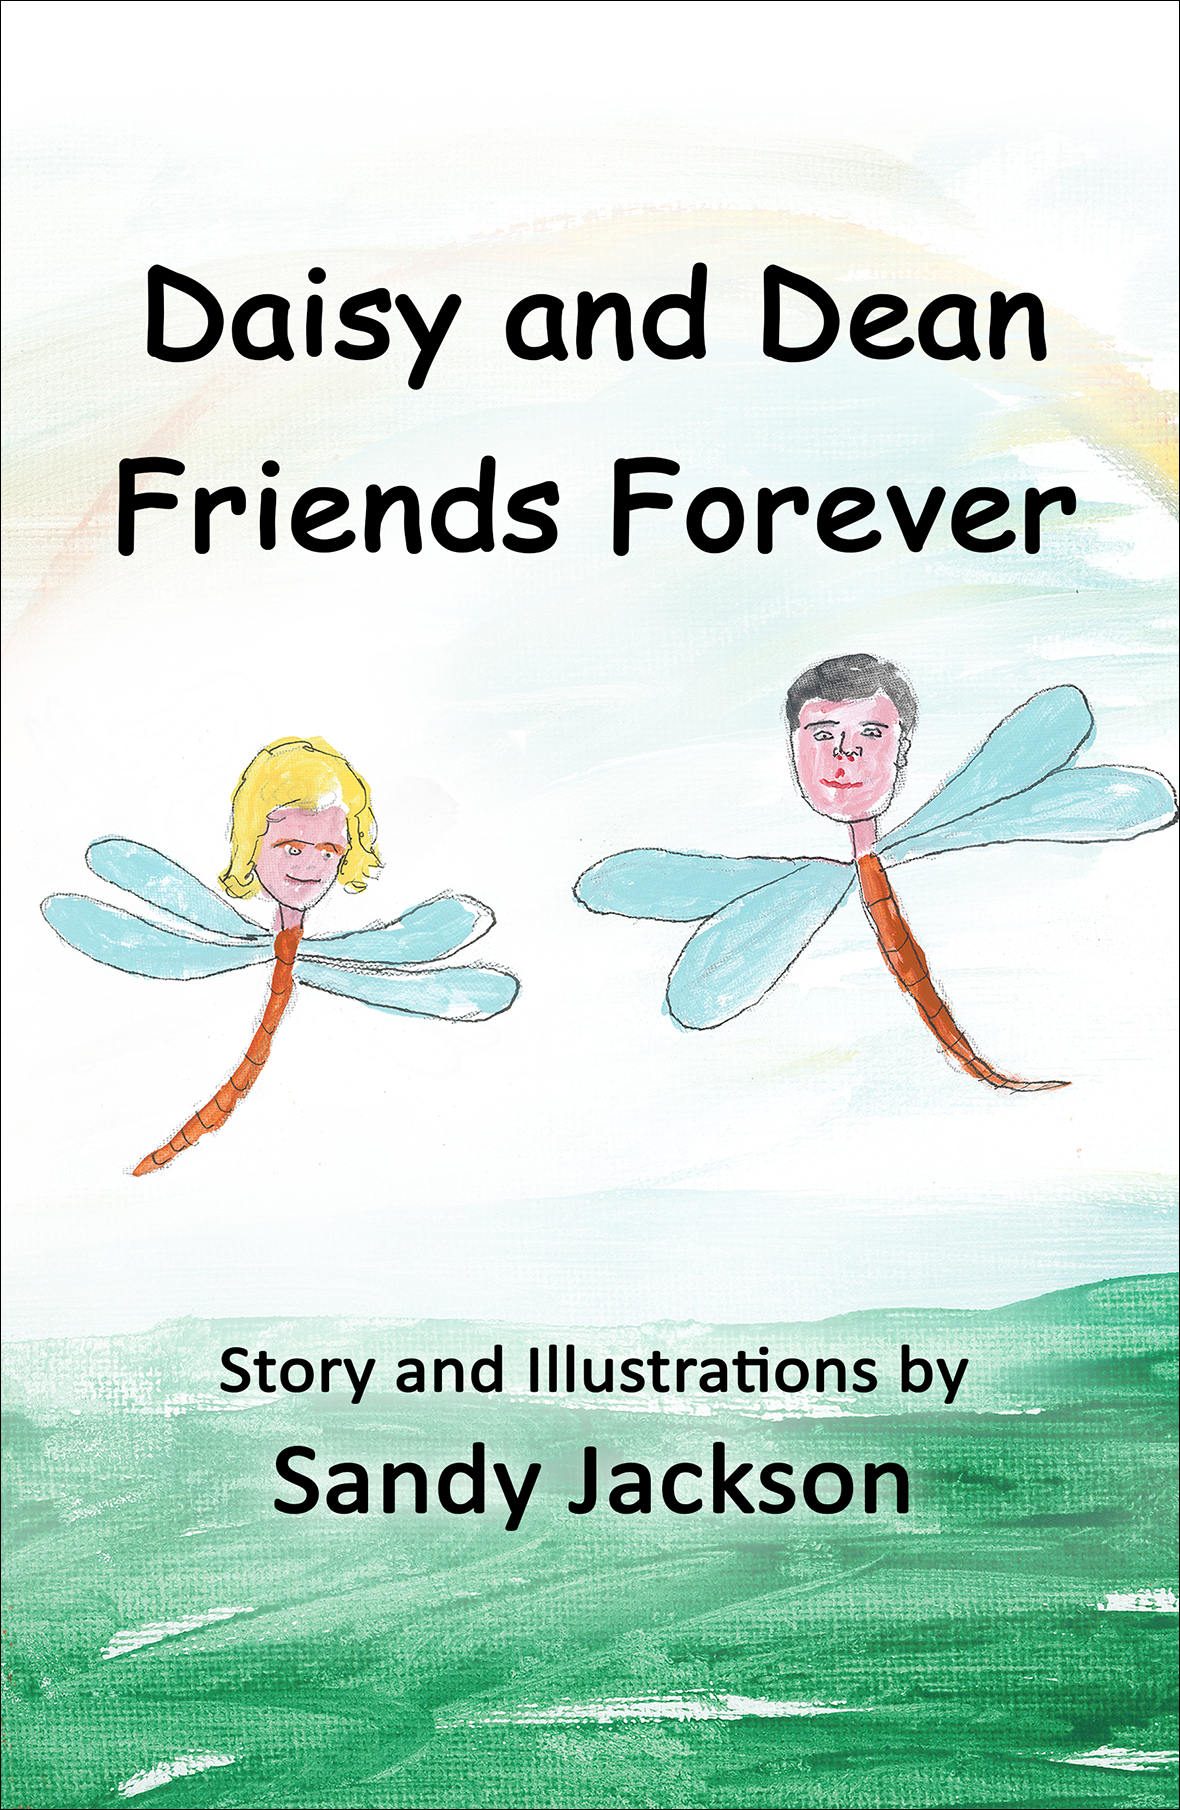 Daisy and Dean Front Cover for Web Insertion